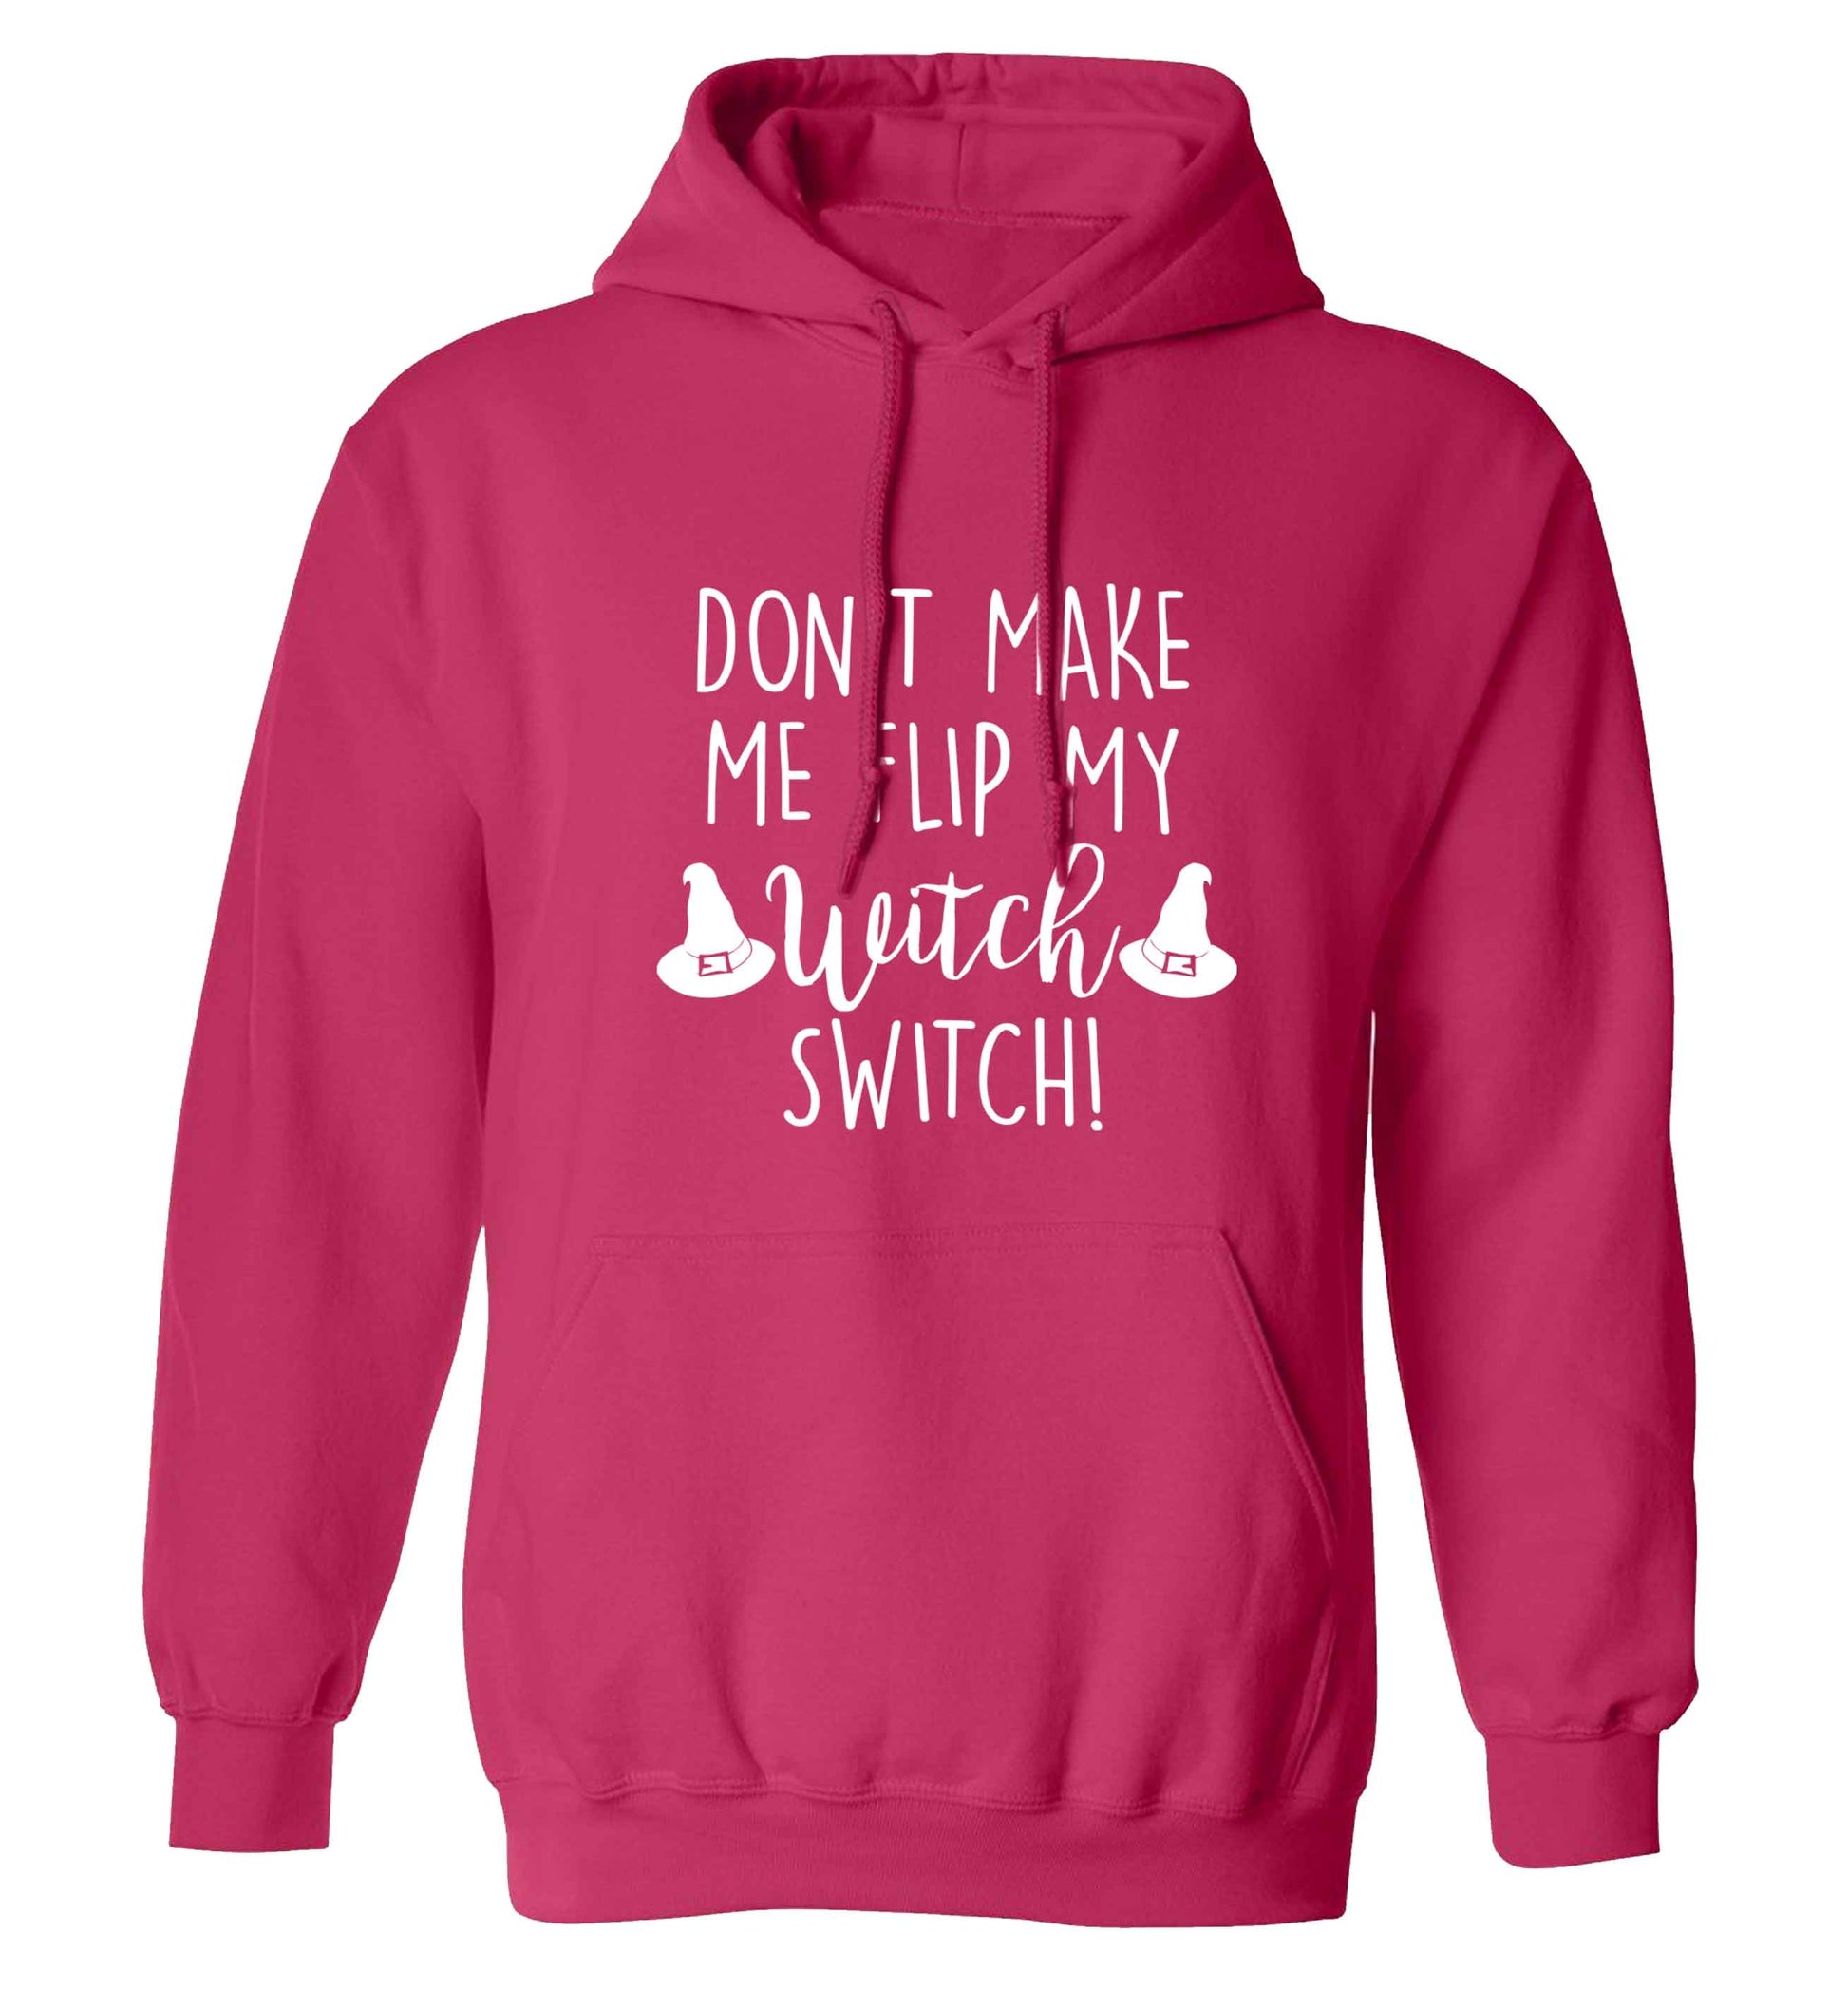 Don't make me flip my witch switch adults unisex pink hoodie 2XL